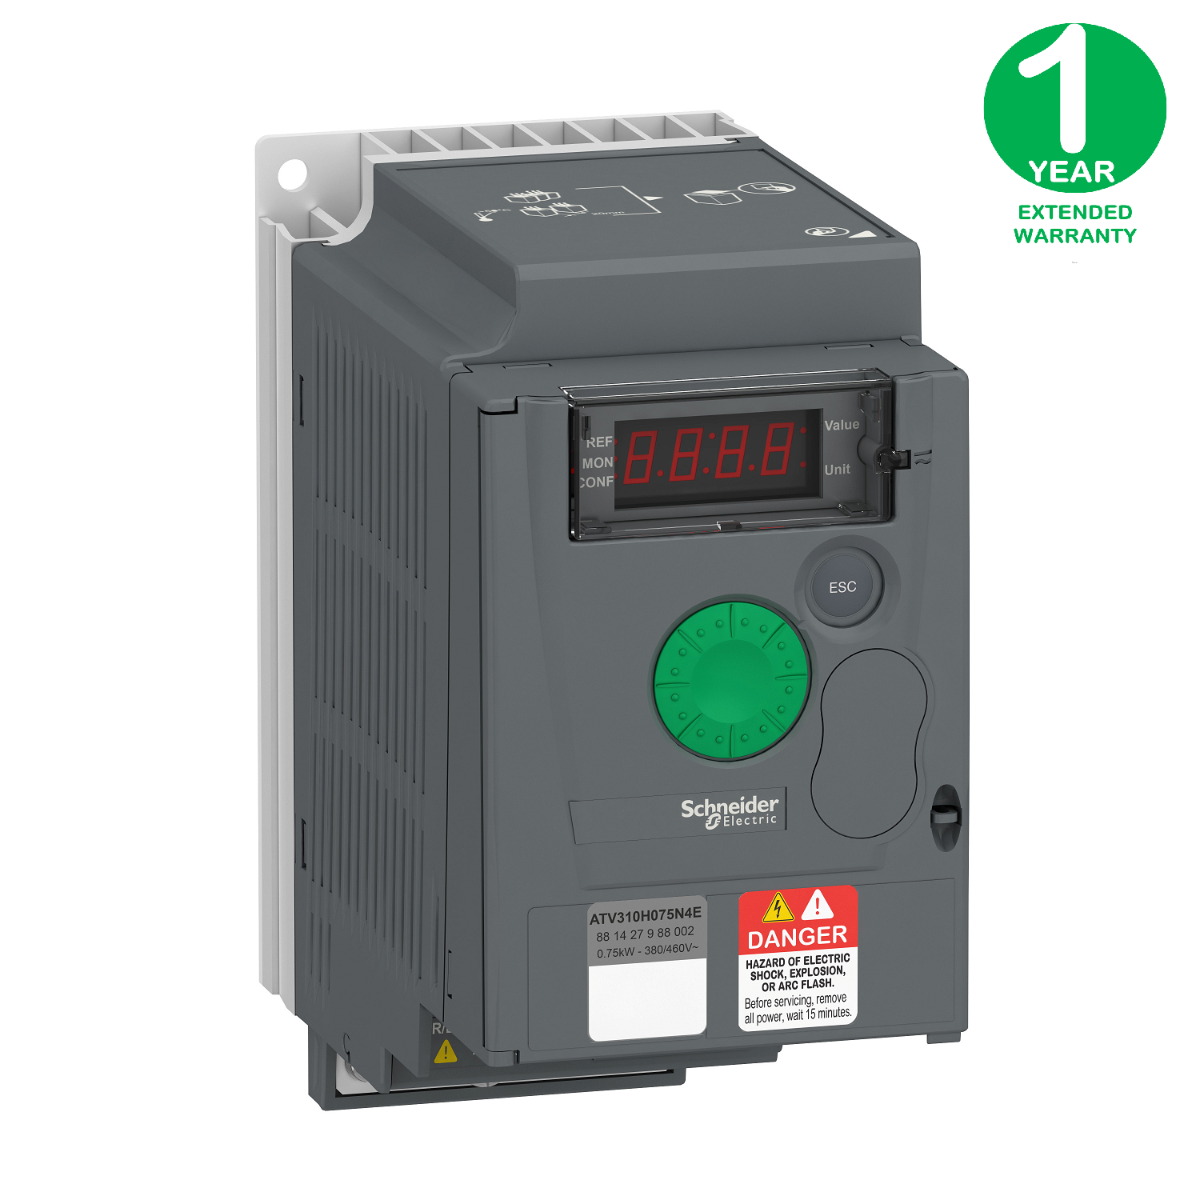 variable speed drive ATV310, 0.75 kW, 1 hp, 380...460 V, 3 phase, without filter + Extended Warranty 1 year